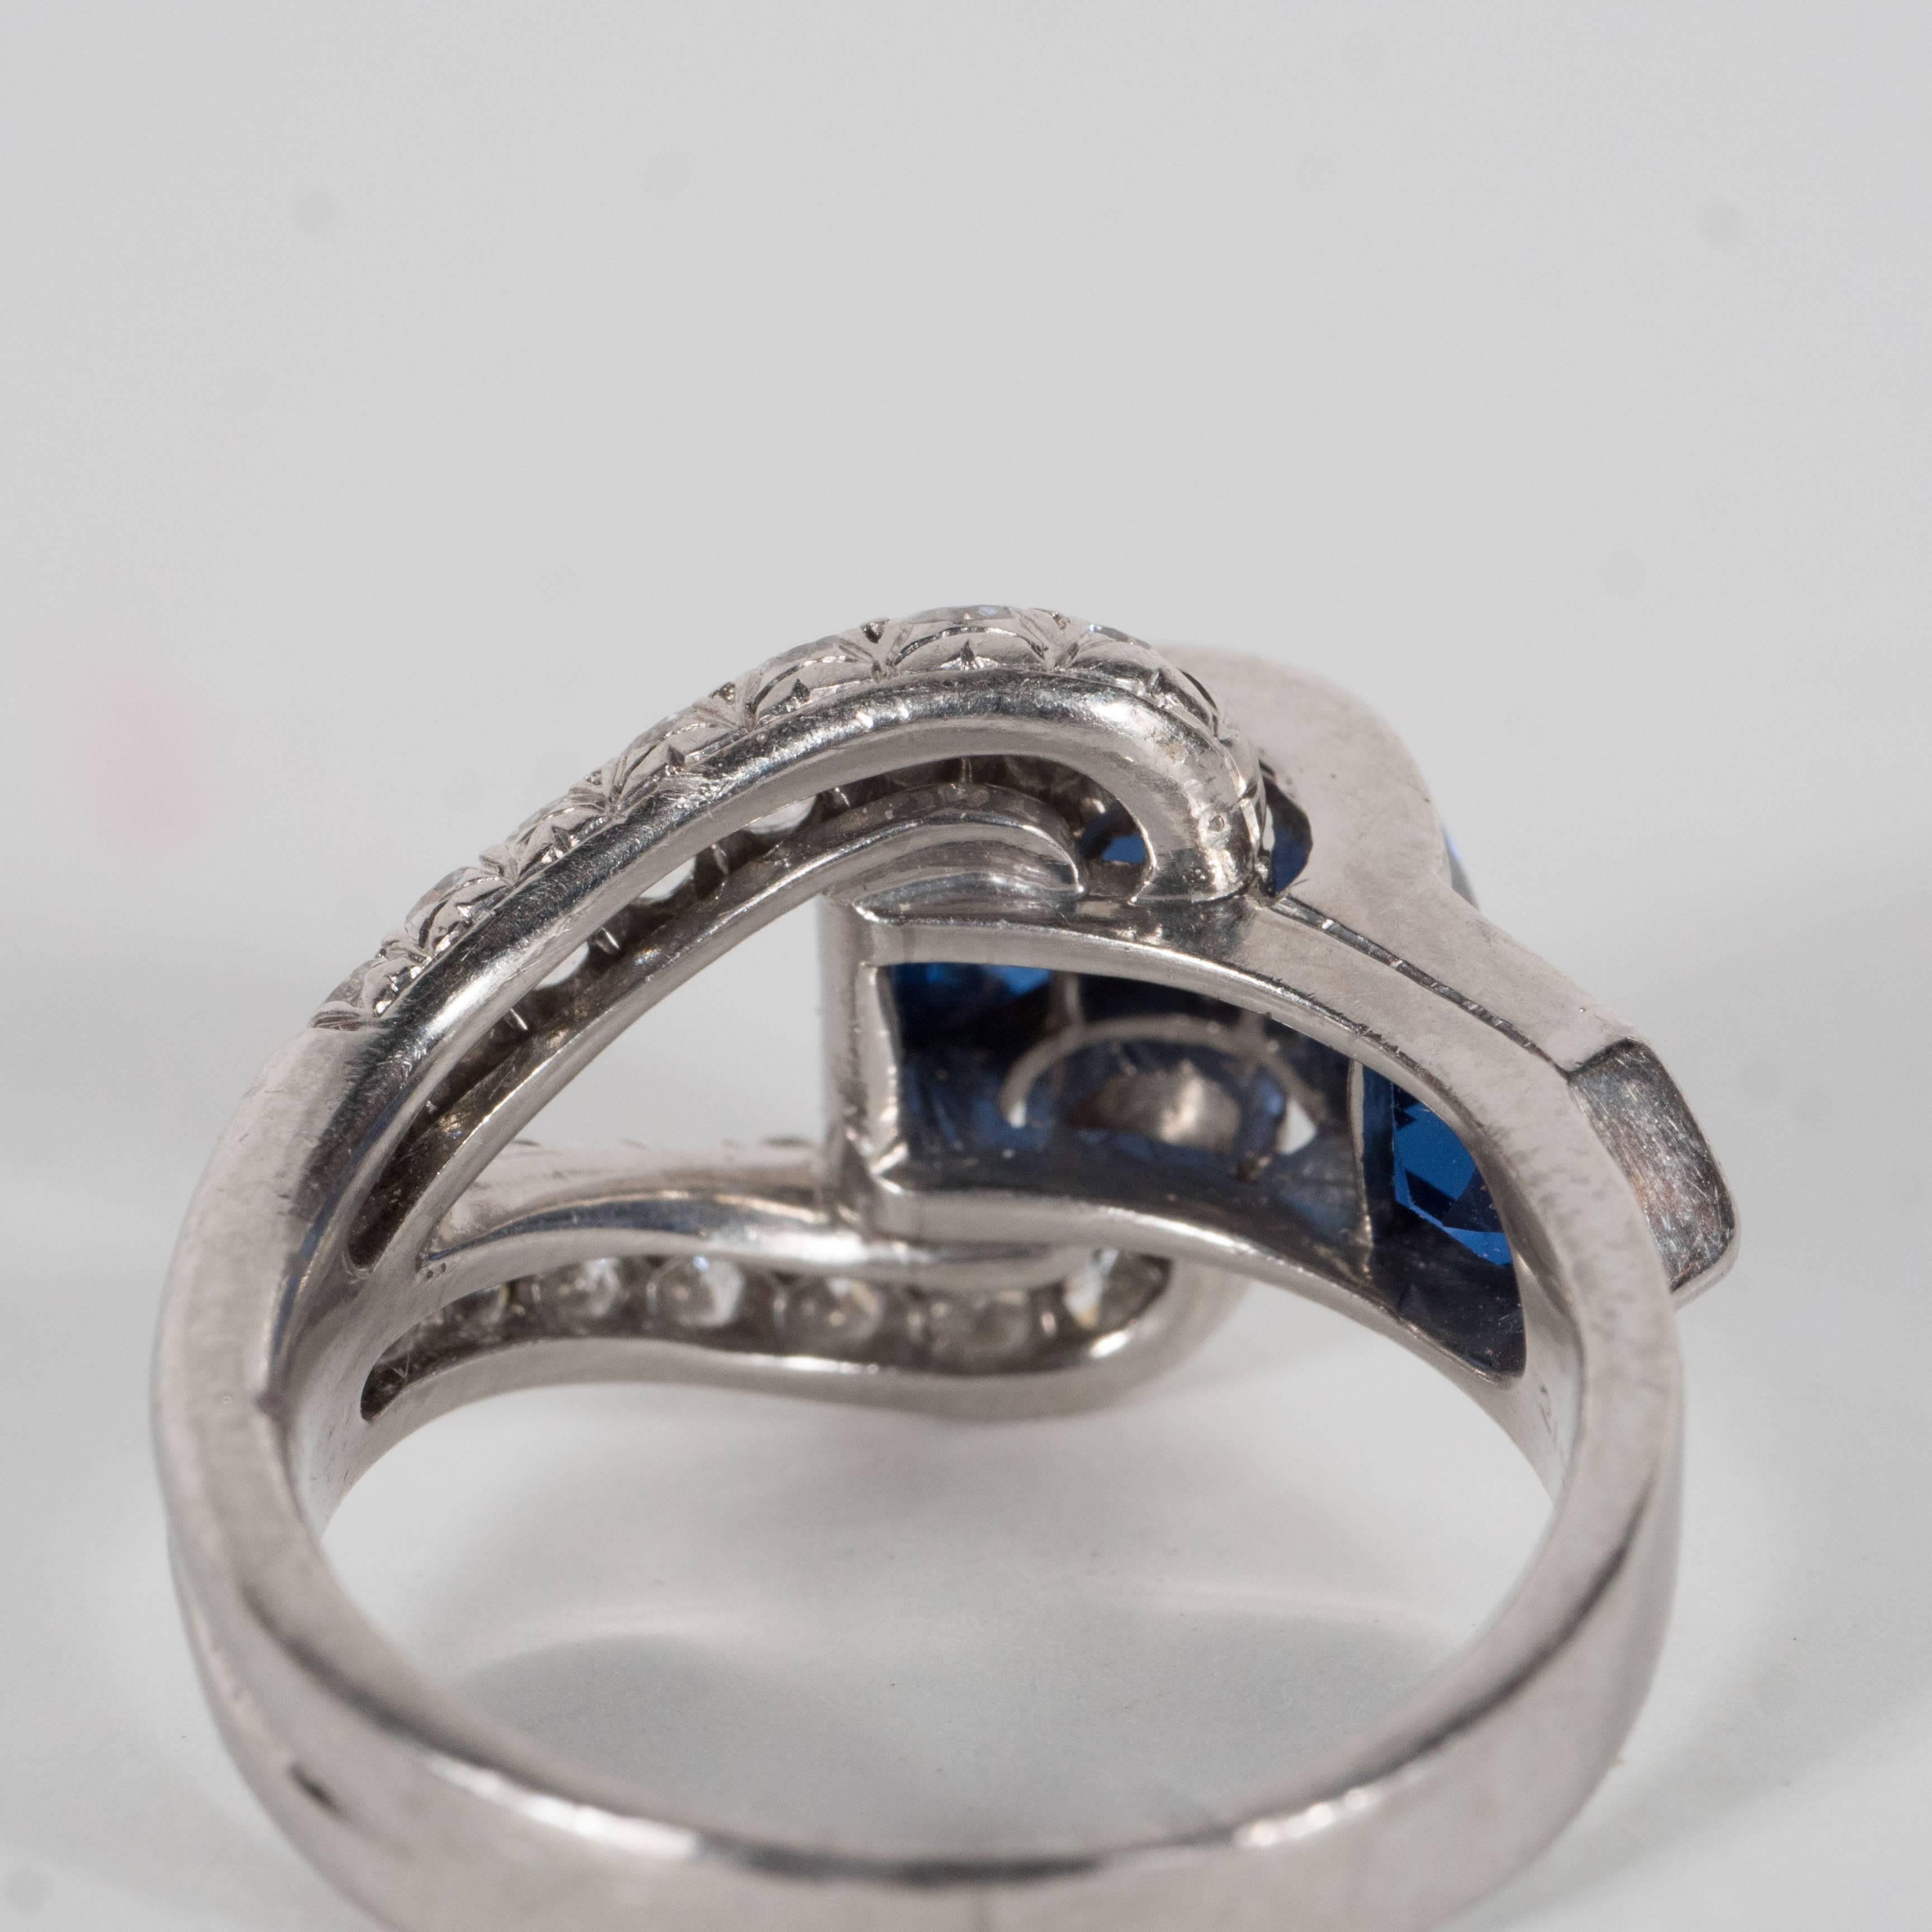 This stunning ring features 4 fine Burmese sapphires with 28 full cut European diamonds all set in a buckle design in platinum. It weighs 6 grams and is a size 6 but the buyer can size to suit. It is made in the United States Circa 1935.